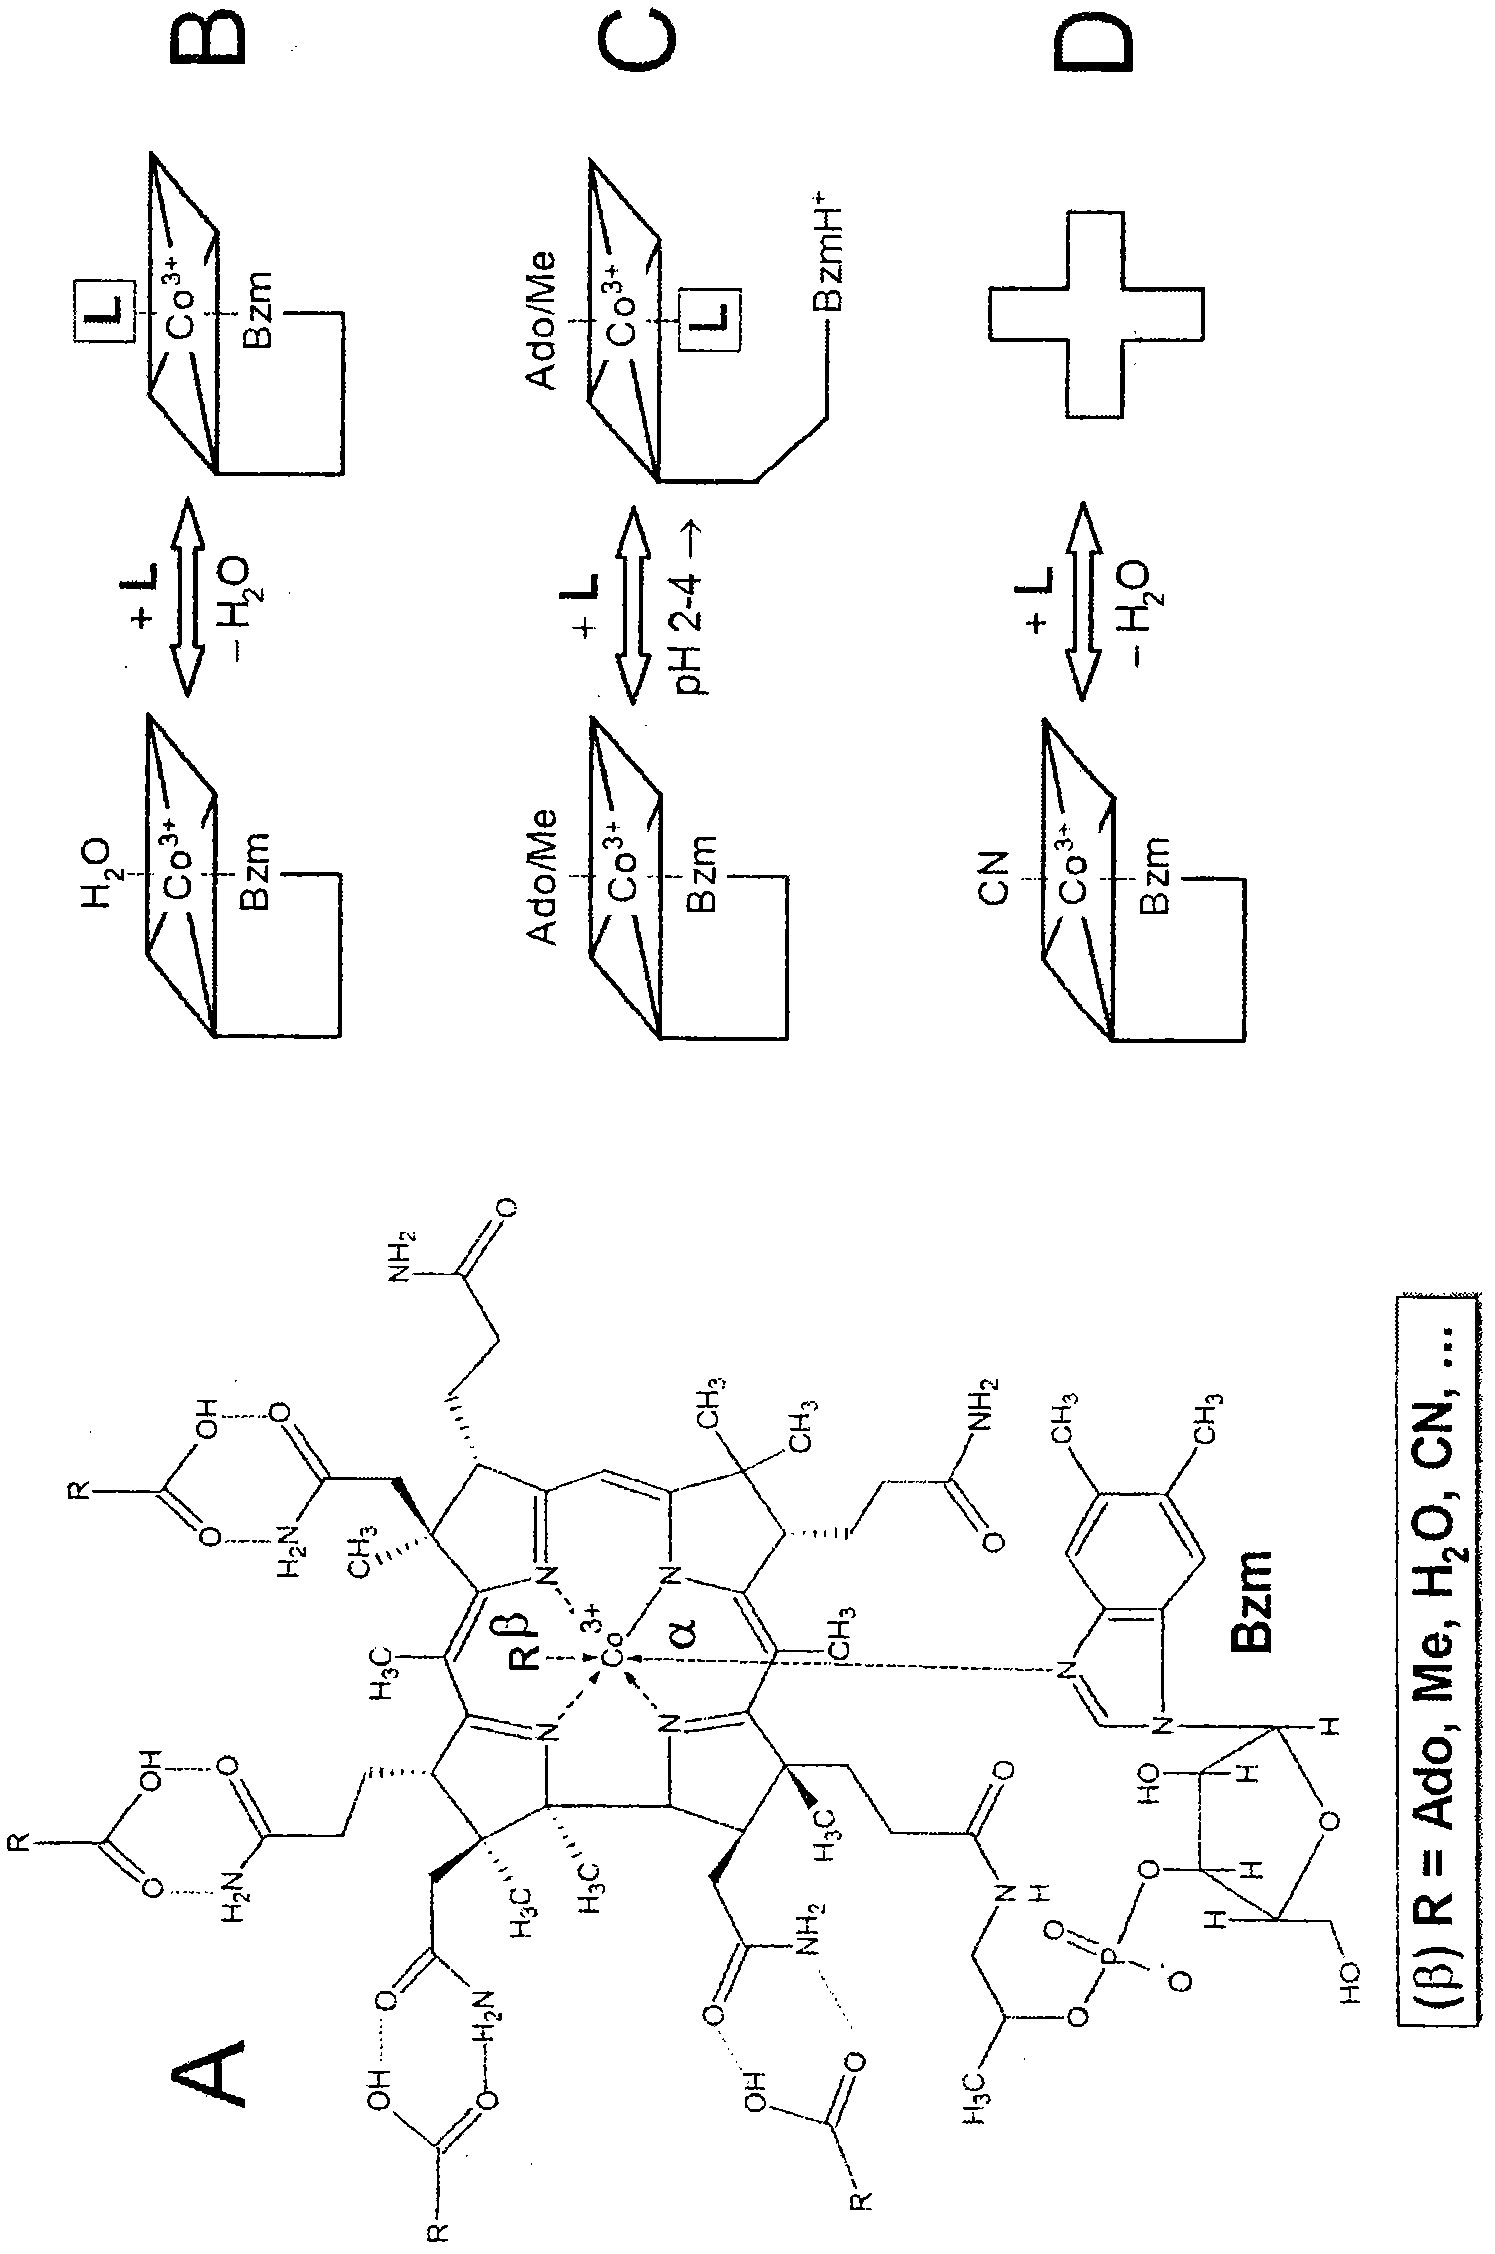 Method for purification of natural cobalamins by adsorption on insoluble materials containing carboxylic groups